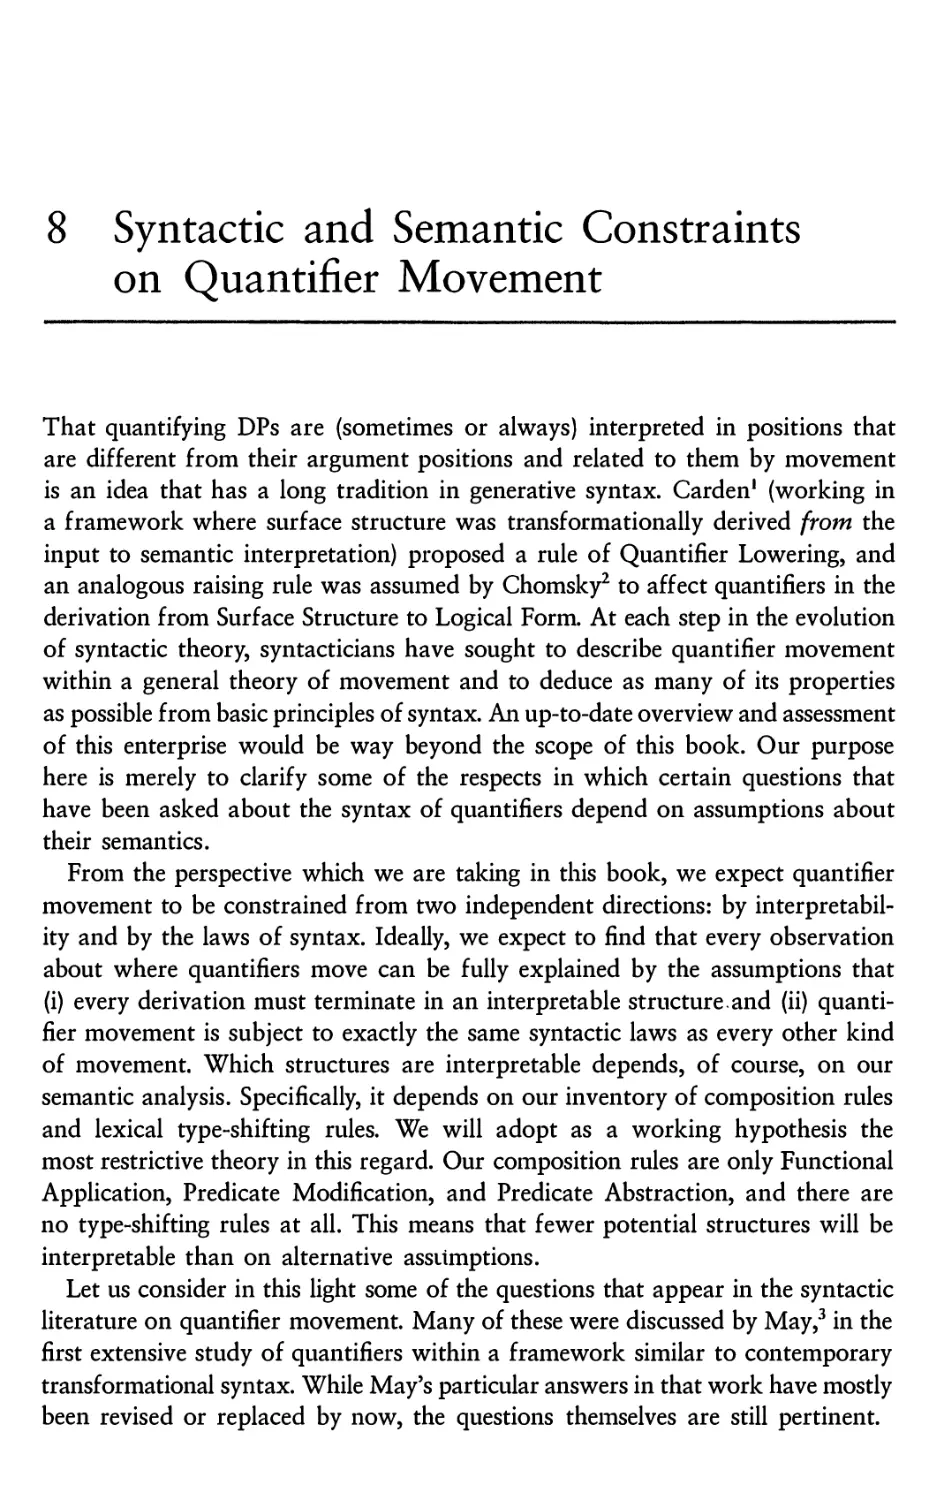 8 Syntactic and Semantic Constraints on Quantifier Movement